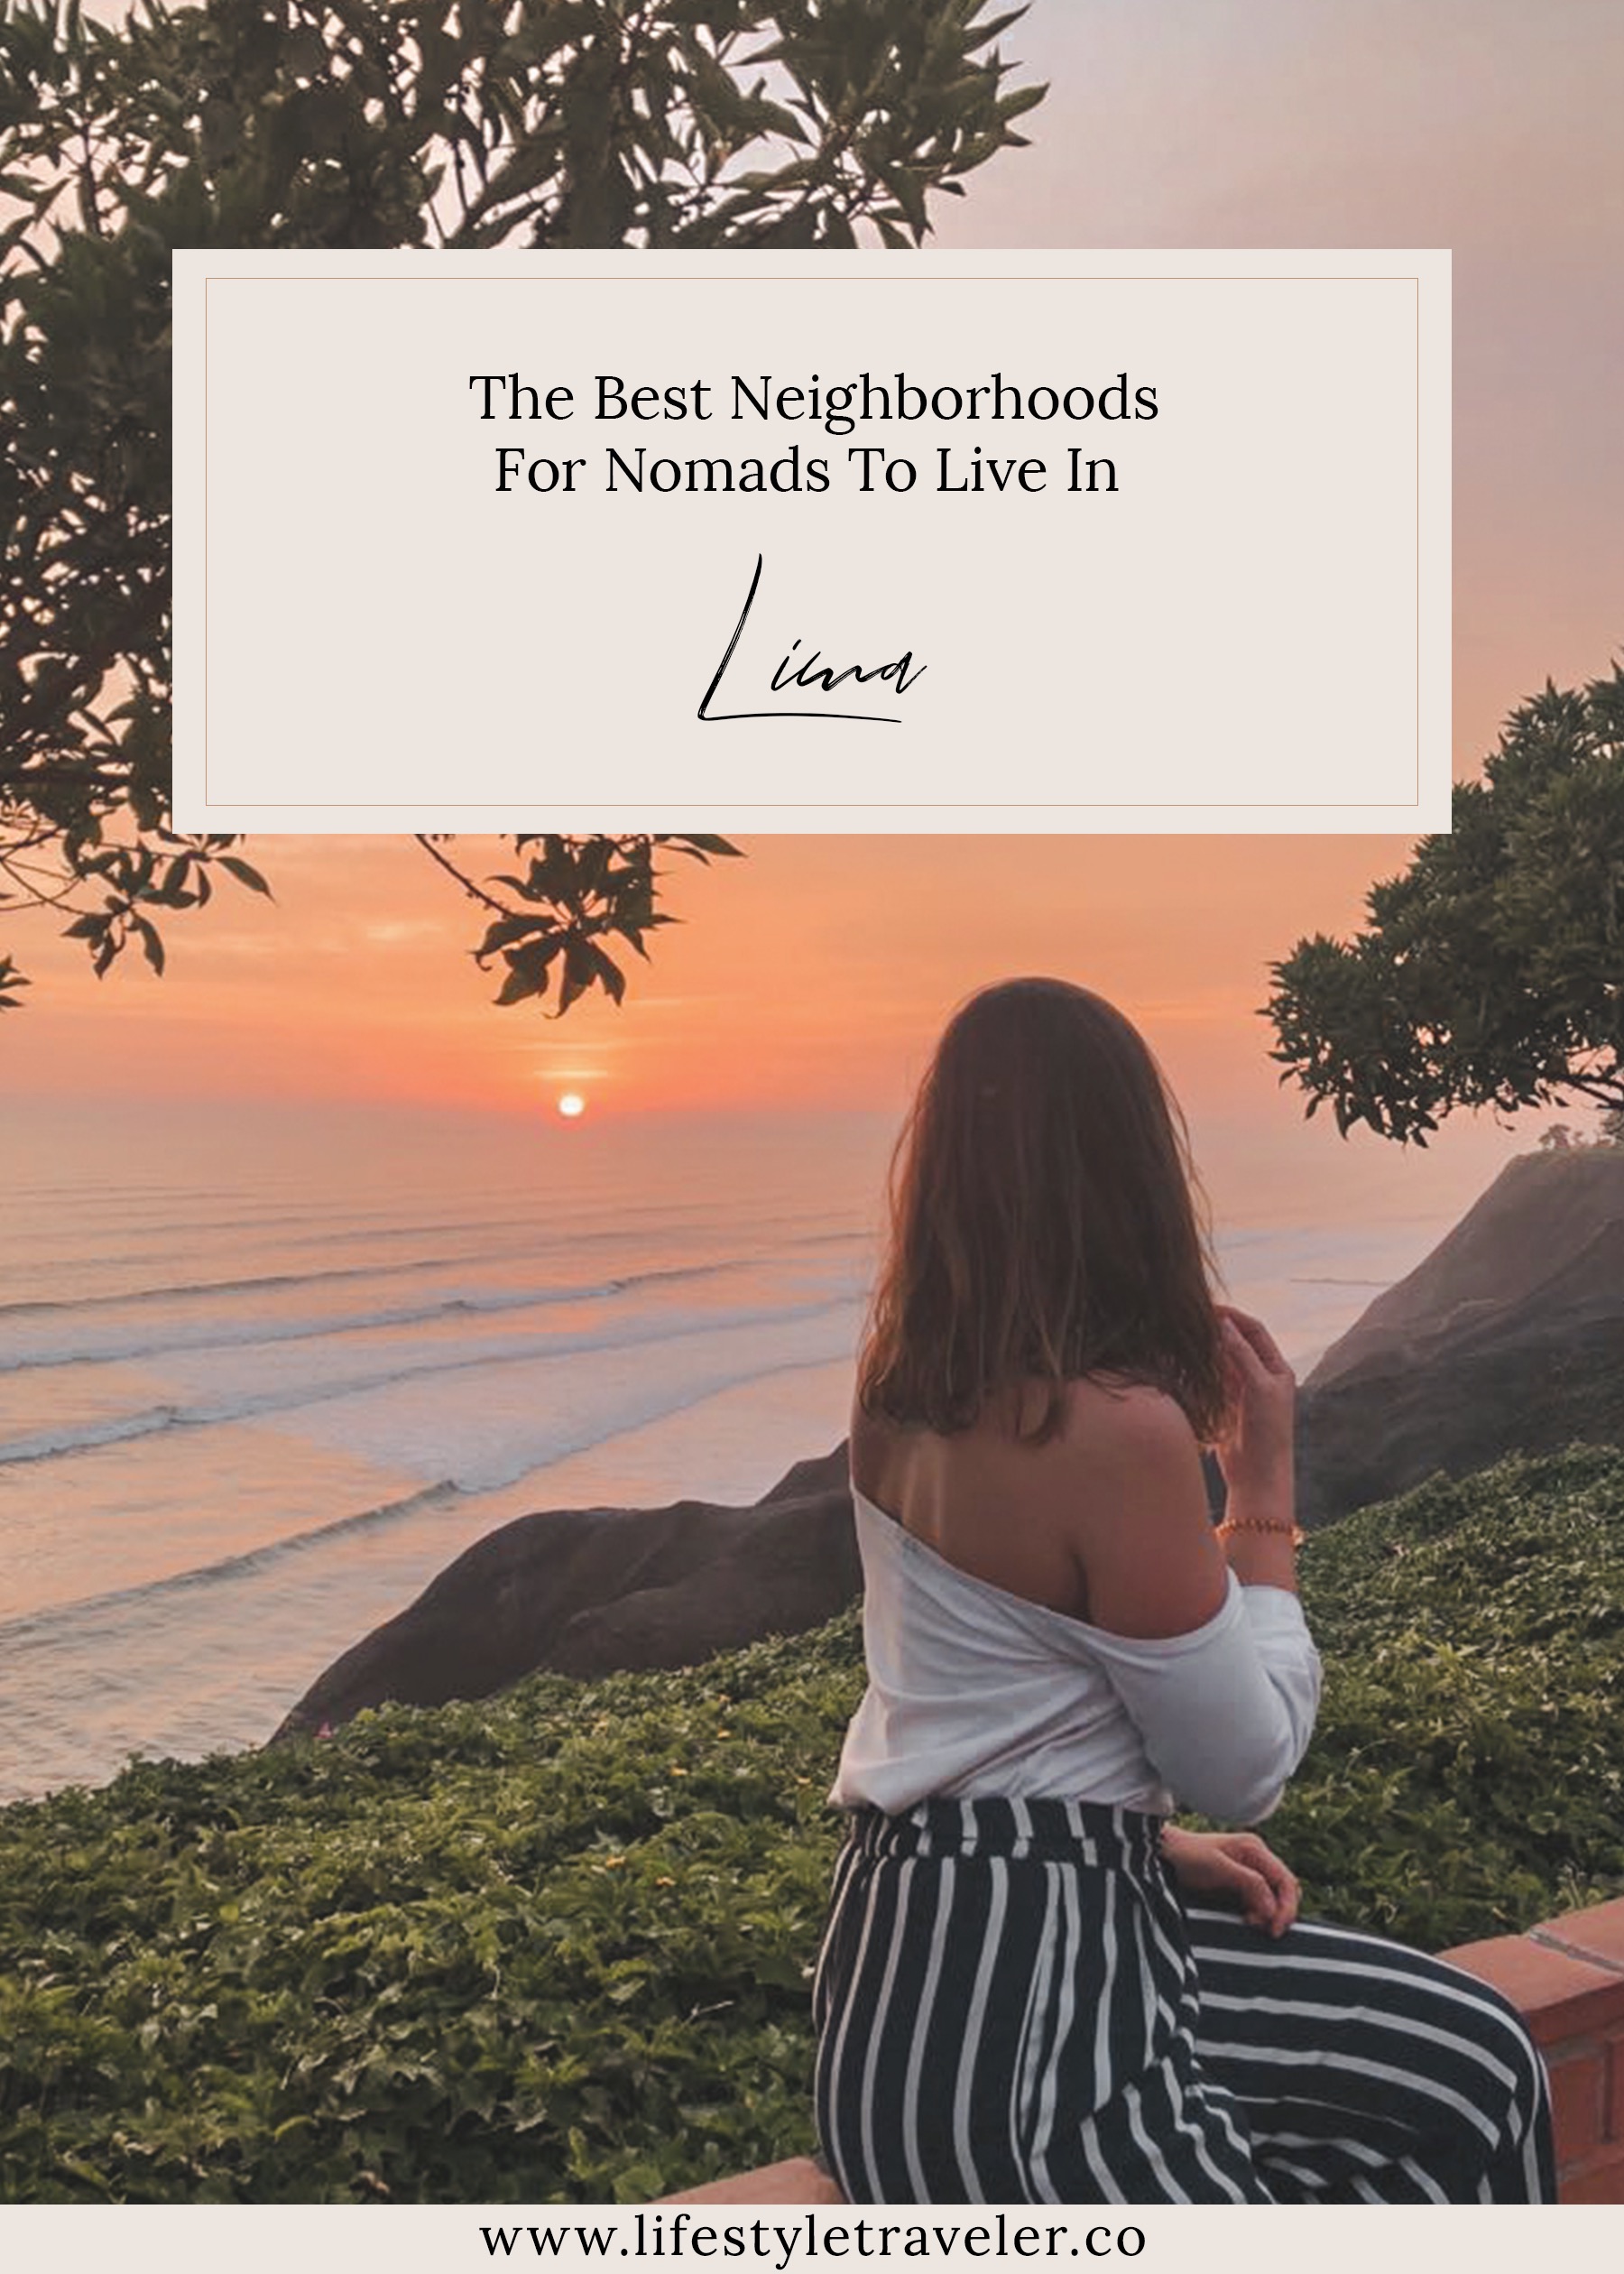 The Best Neighborhoods To Live In Lima For Nomads | lifestyletraveler.co | IG: @lifestyletraveler.co